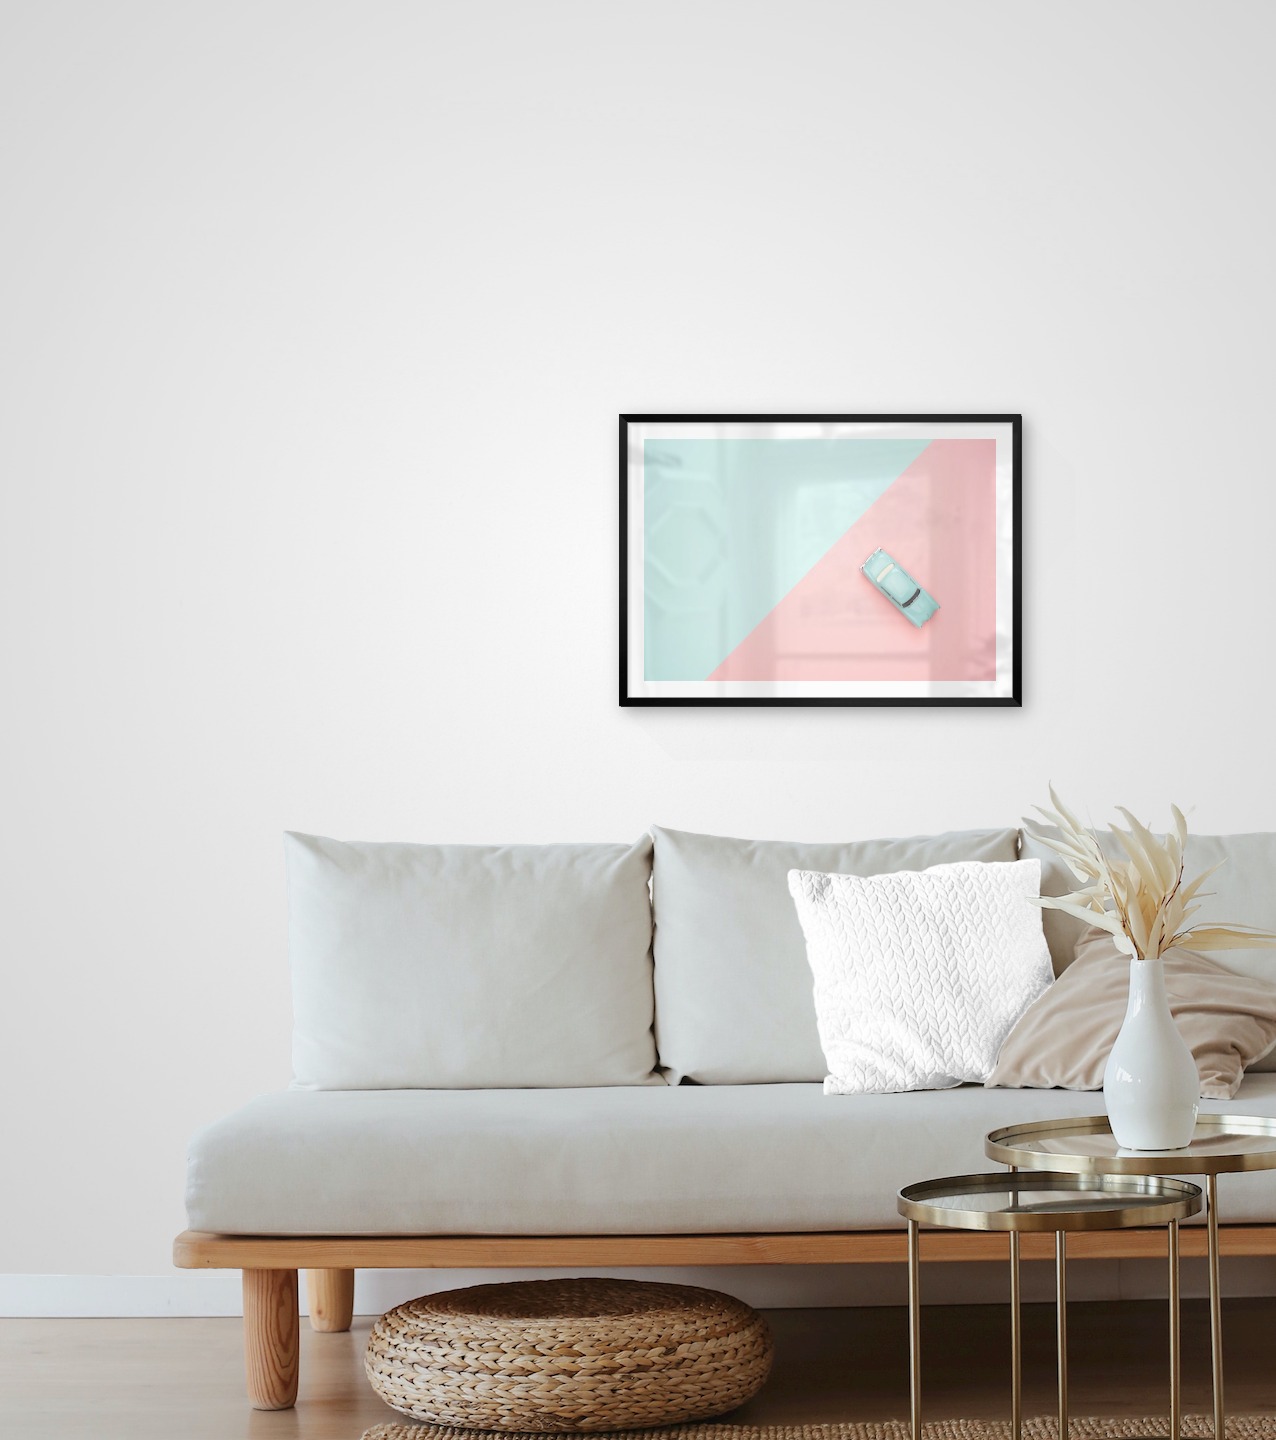 Gallery wall with picture frame in black in size 50x70 with print "Blue car and pink"